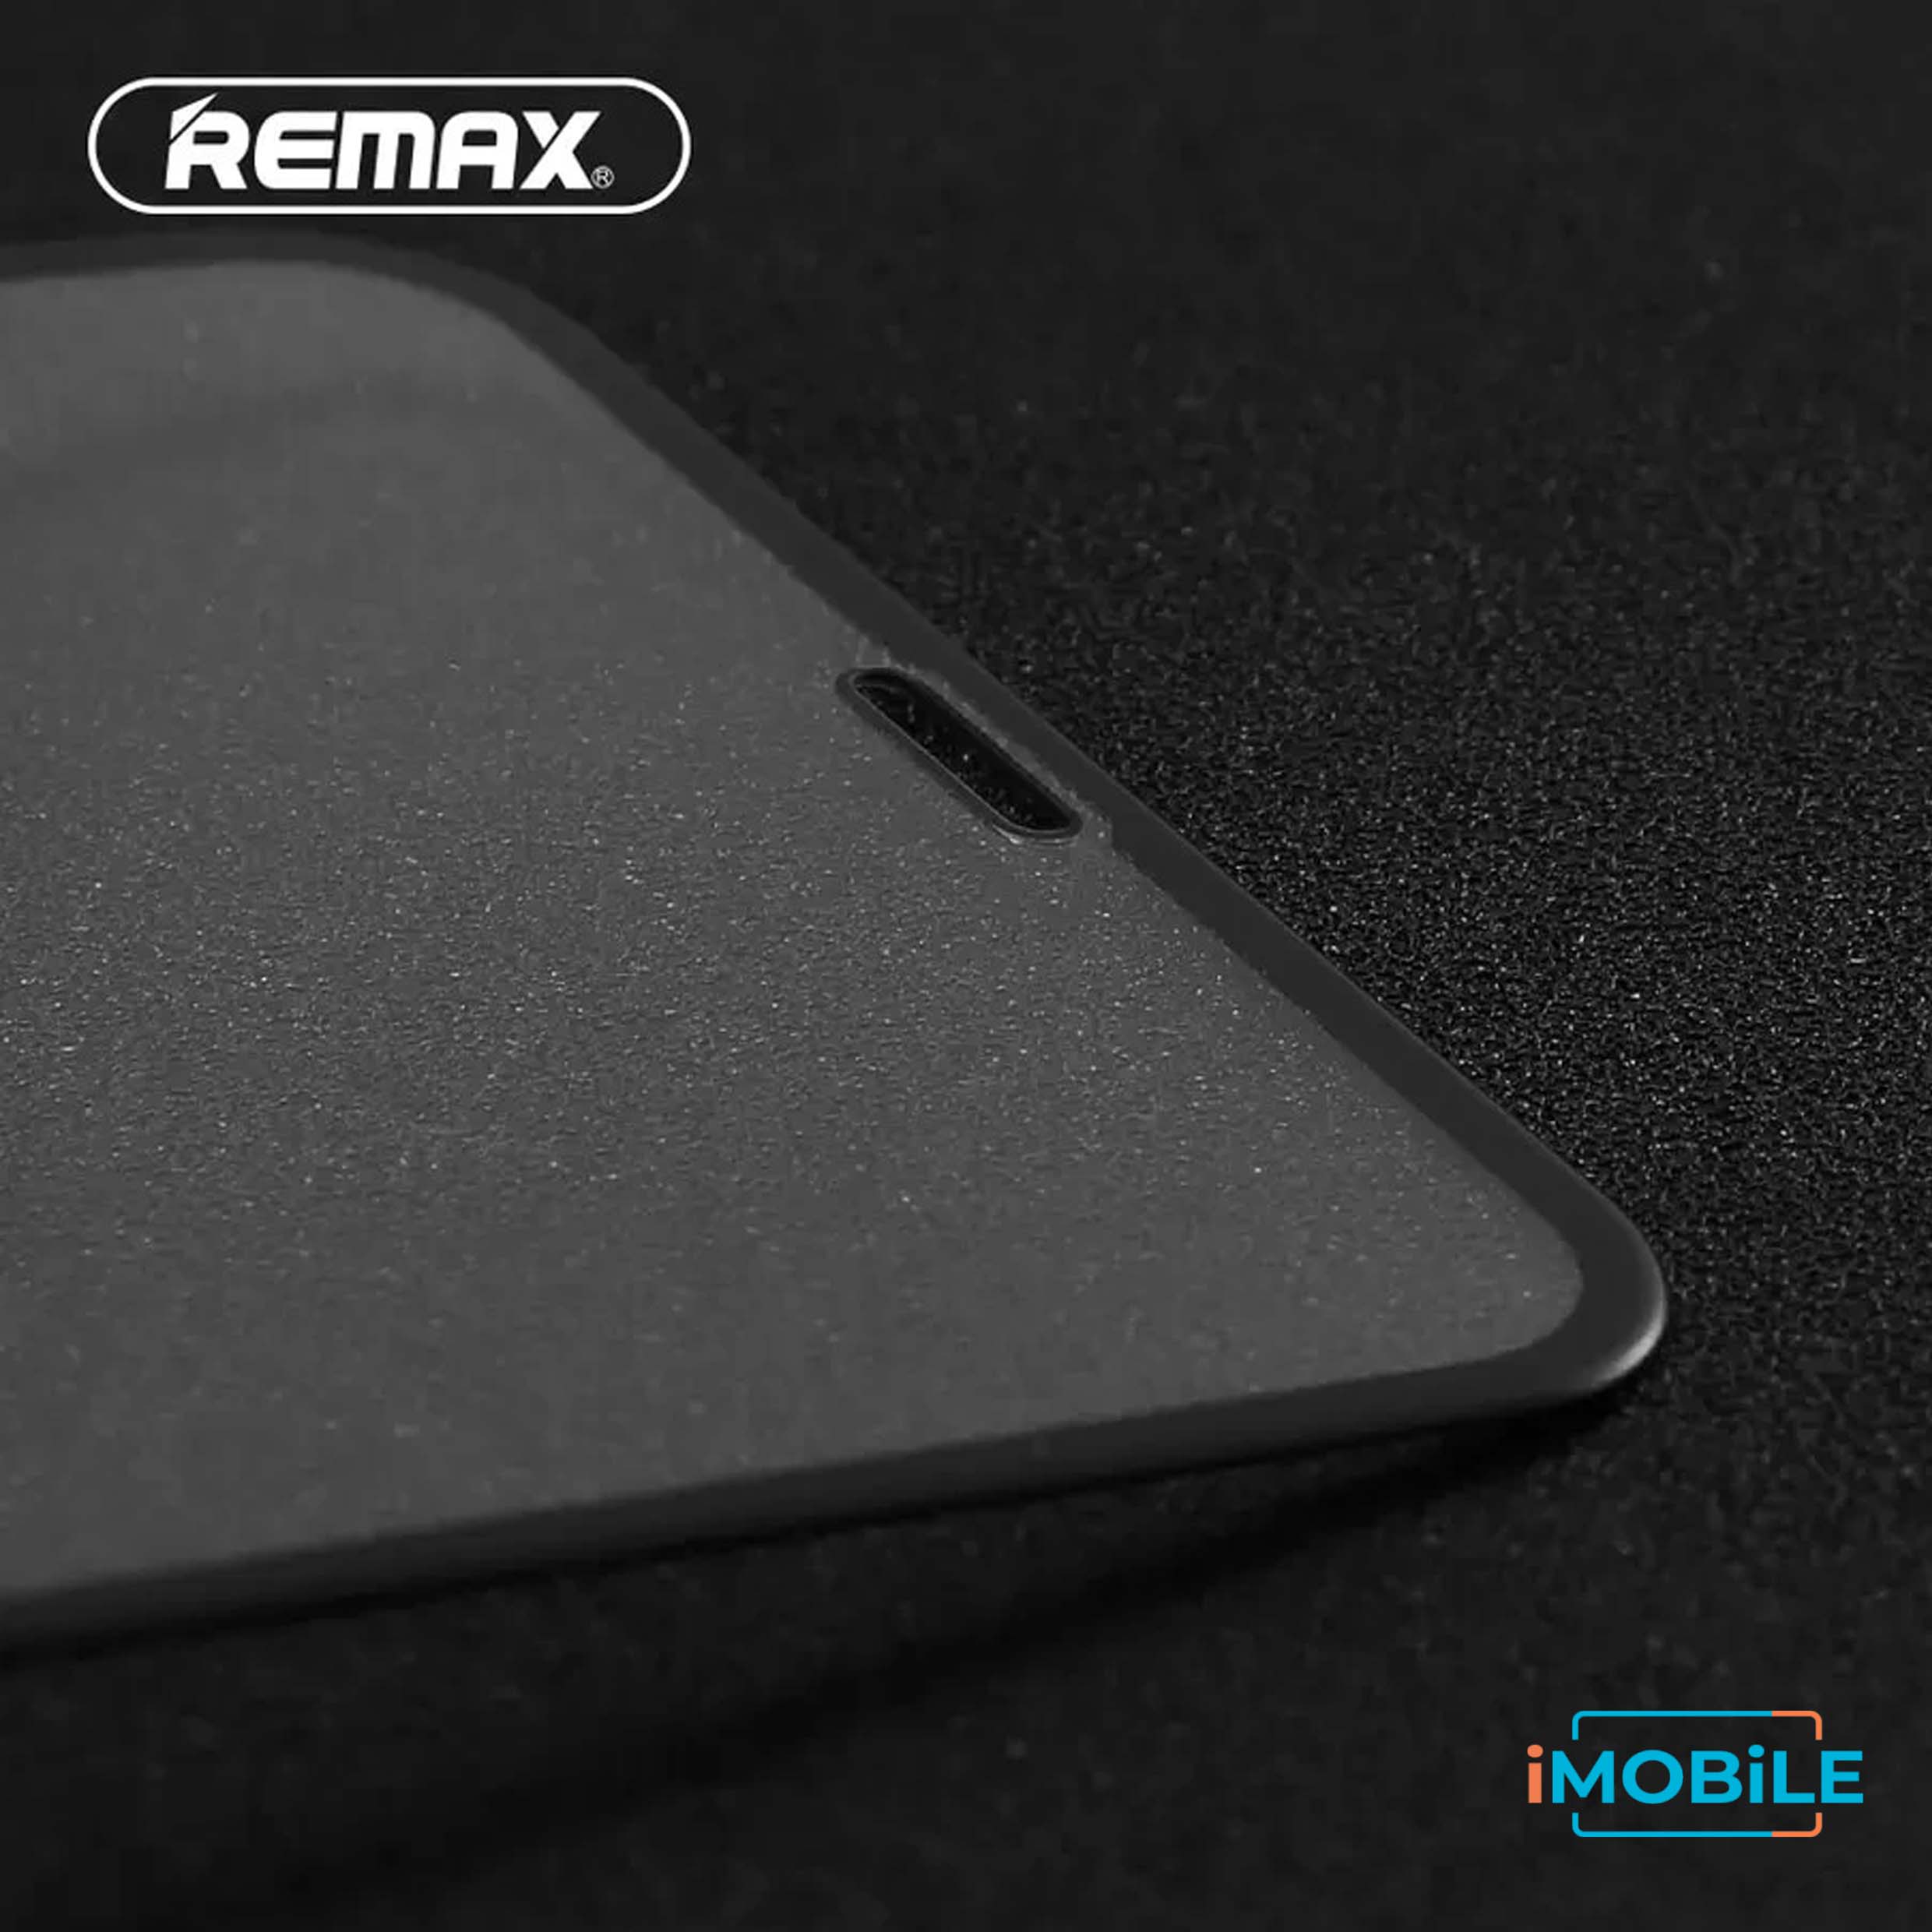 Remax 2.5D Tempered Glass with Envelope Pack, iPhone XR/11